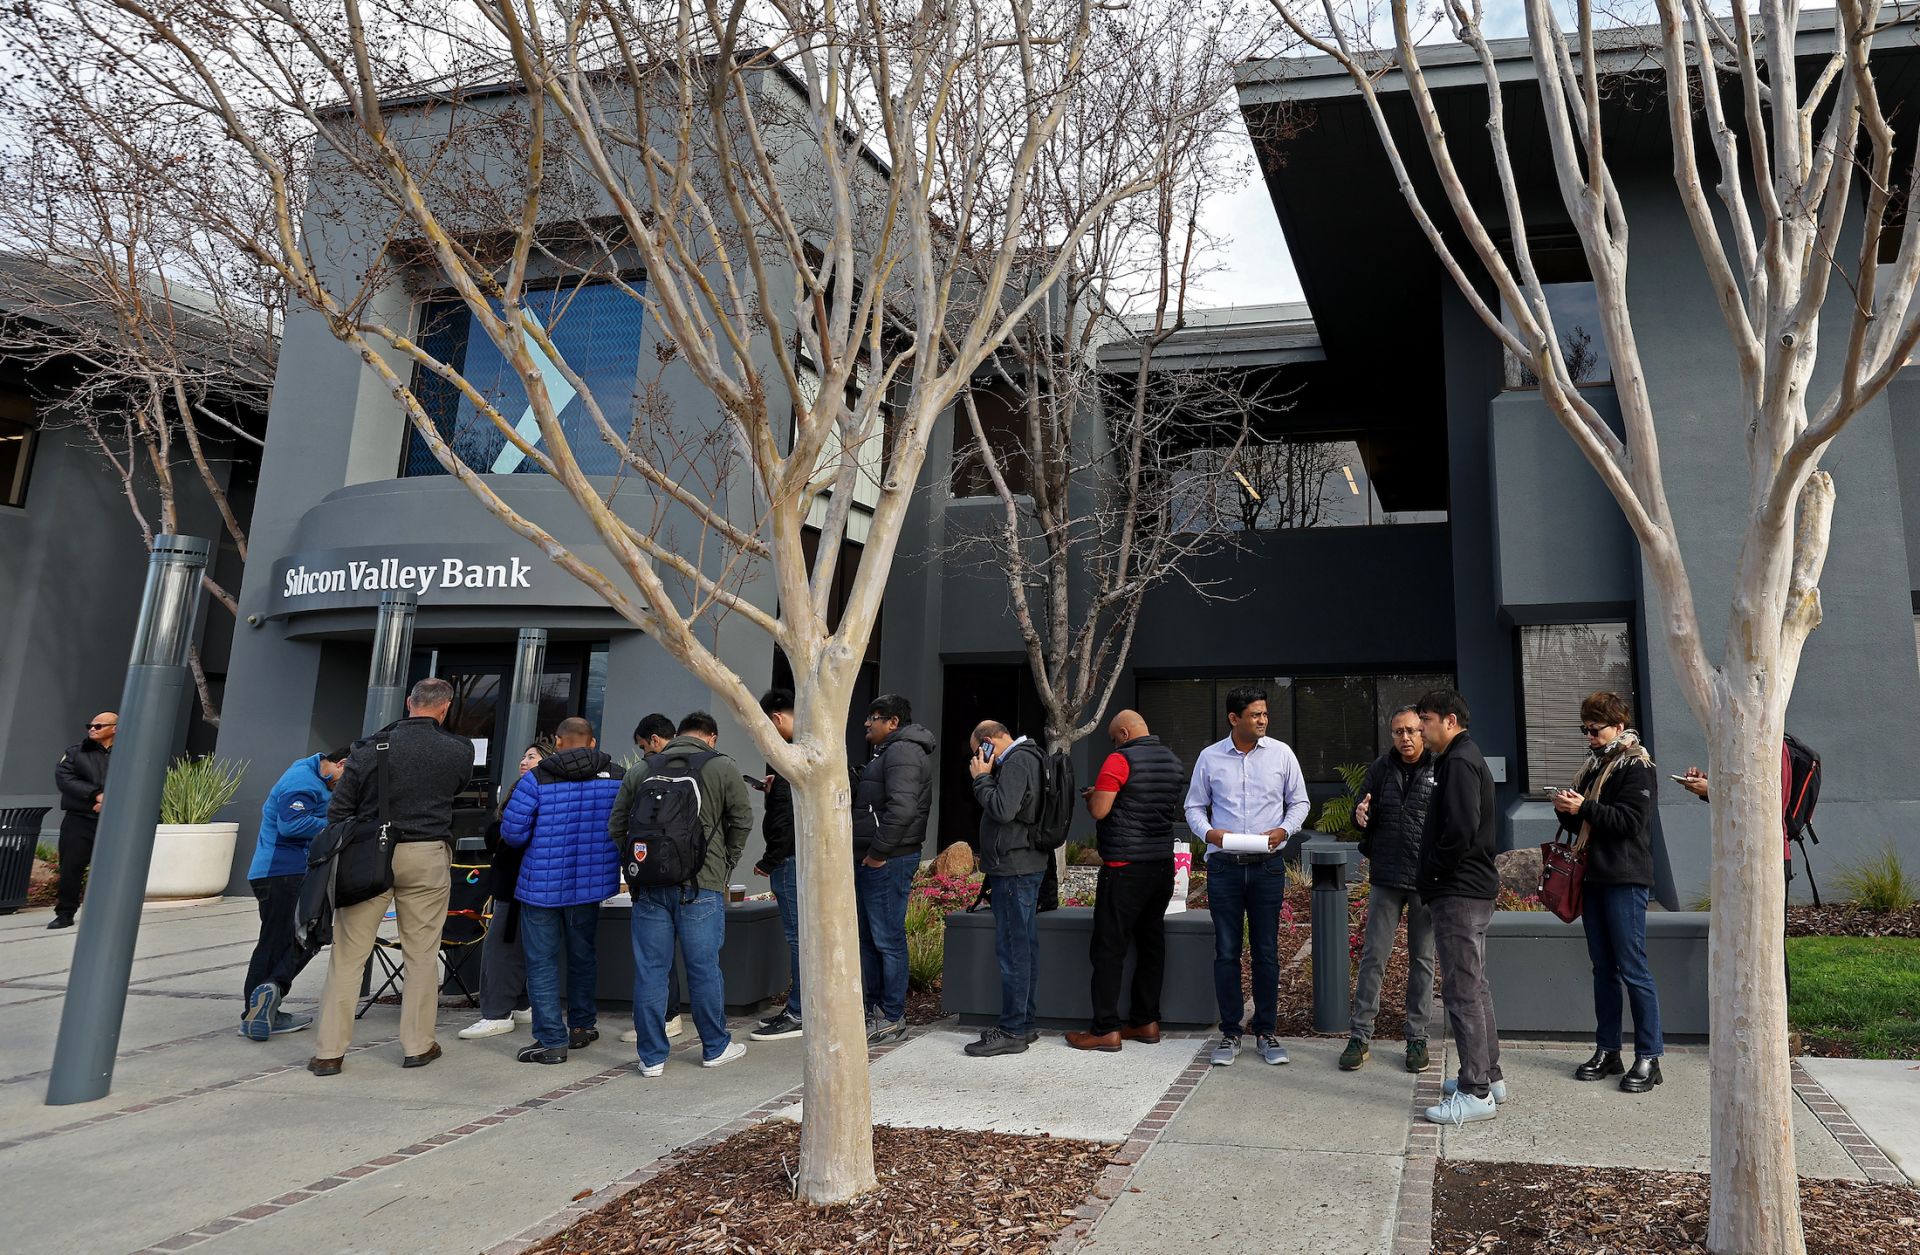 People seeking to retrieve their funds from the failed Silicon Valley Bank line up outside of the bank's offices in Santa Clara, California, on March 13, 2023.